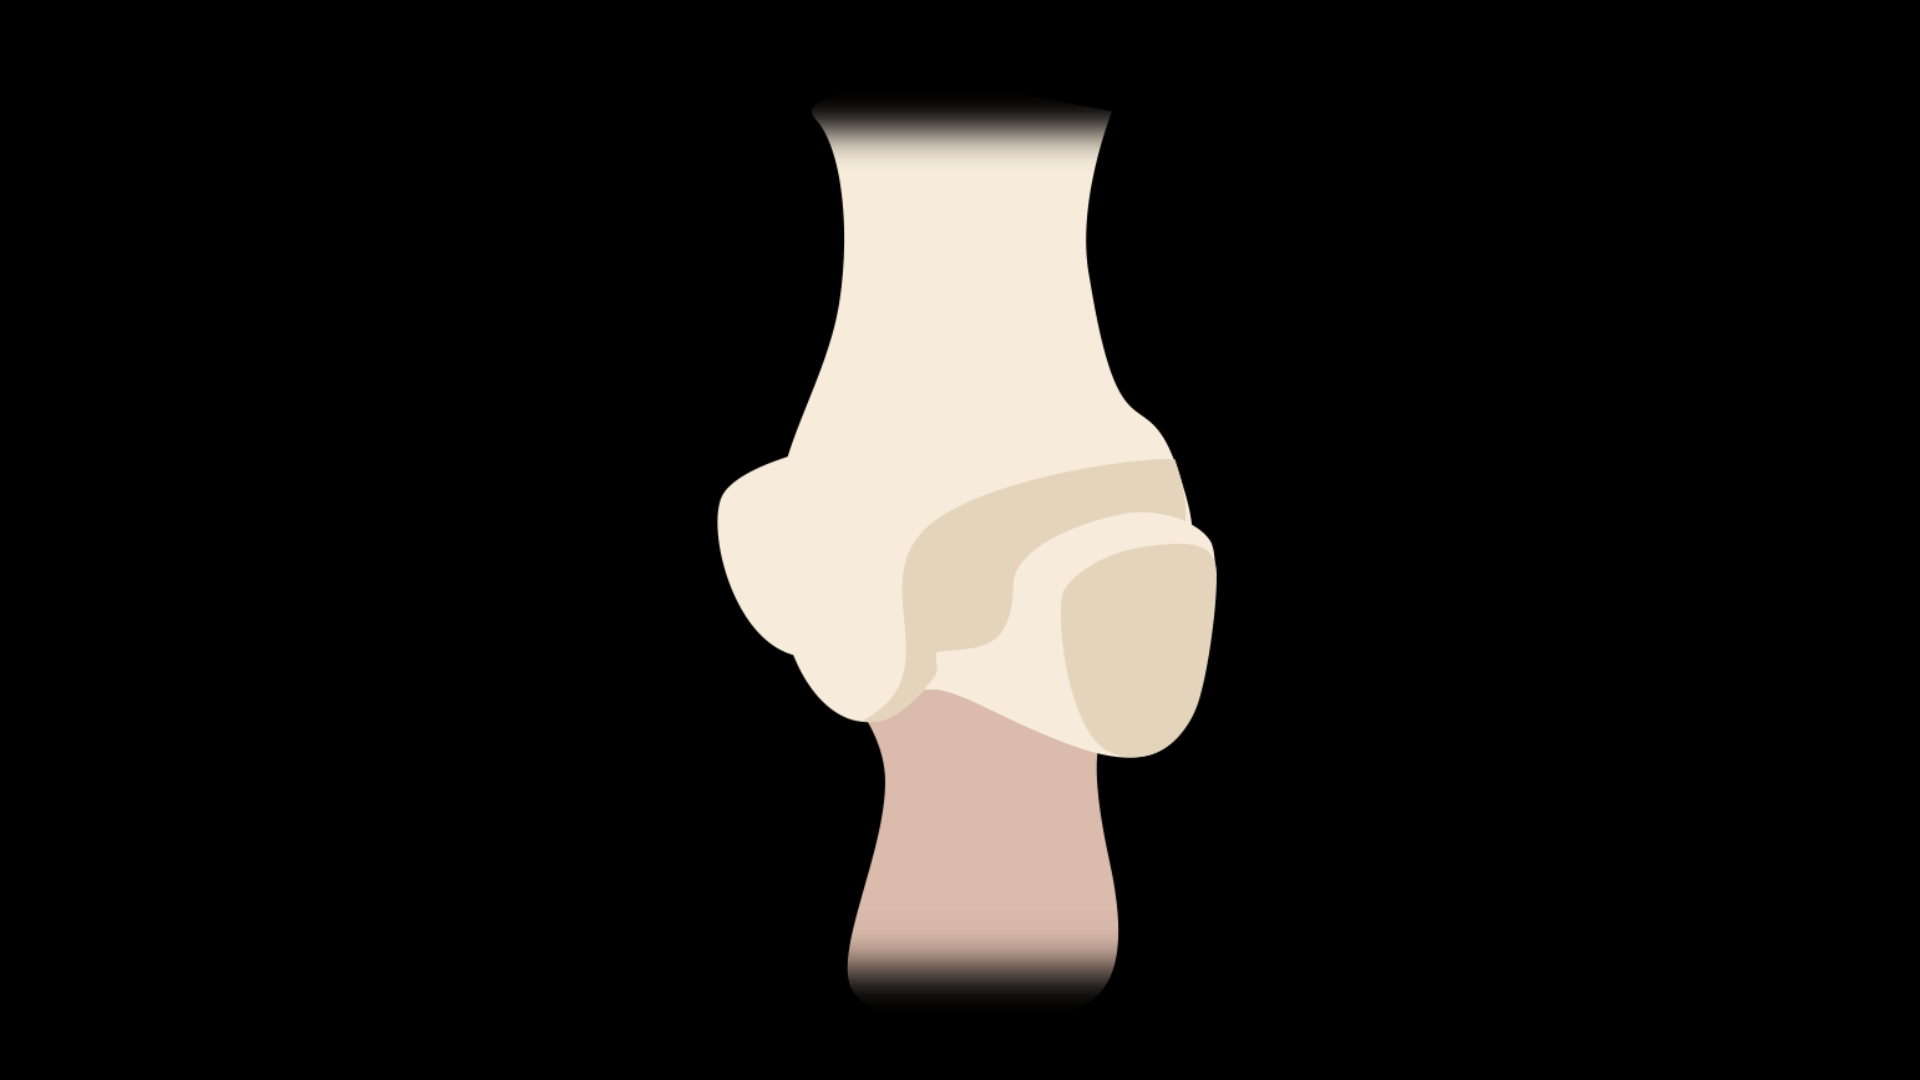 <p>A type of joint that allows for abduction, adduction, flexion, extension, and circumduction. It cannot do rotation, though. One example is the joint in the thumb that connects the carpals and the metacarpals (trapeziometacarpal joints or first carpometacarpal joint).</p>